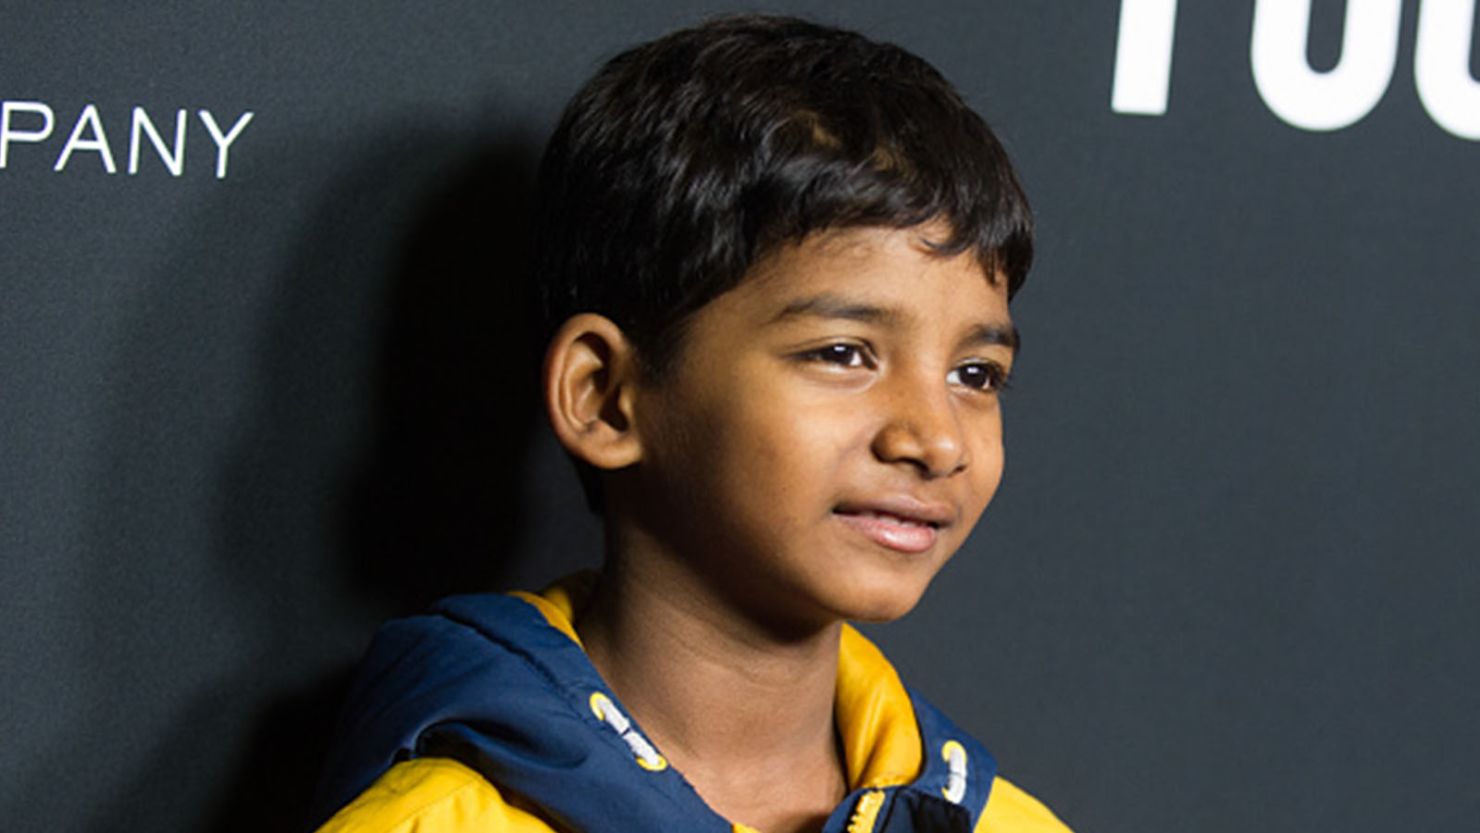 Actor Sunny Pawar attends the premiere of the Weinstein Company's 'The Founder' at ArcLight Cinemas Cinerama Dome on January 11, 2017, in Hollywood, California.